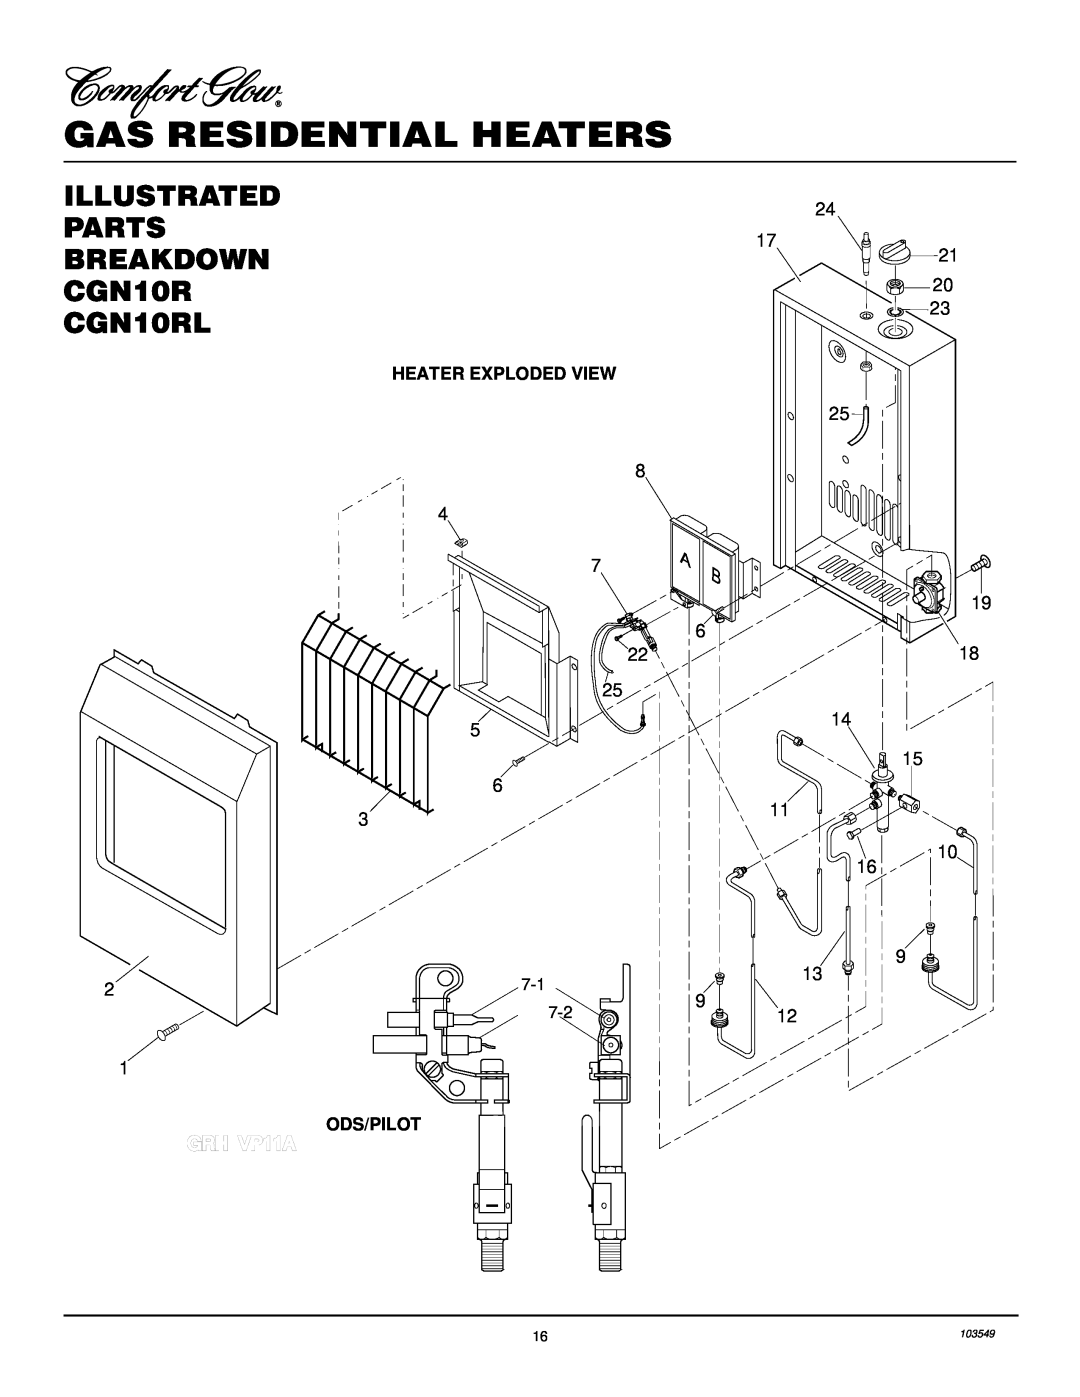 Desa ILLUSTRATED PARTS BREAKDOWN CGN10R CGN10RL, Gas Residential Heaters, 8 4 7 22, 24 17, 19 6 18 14 15 11 10 9 9 